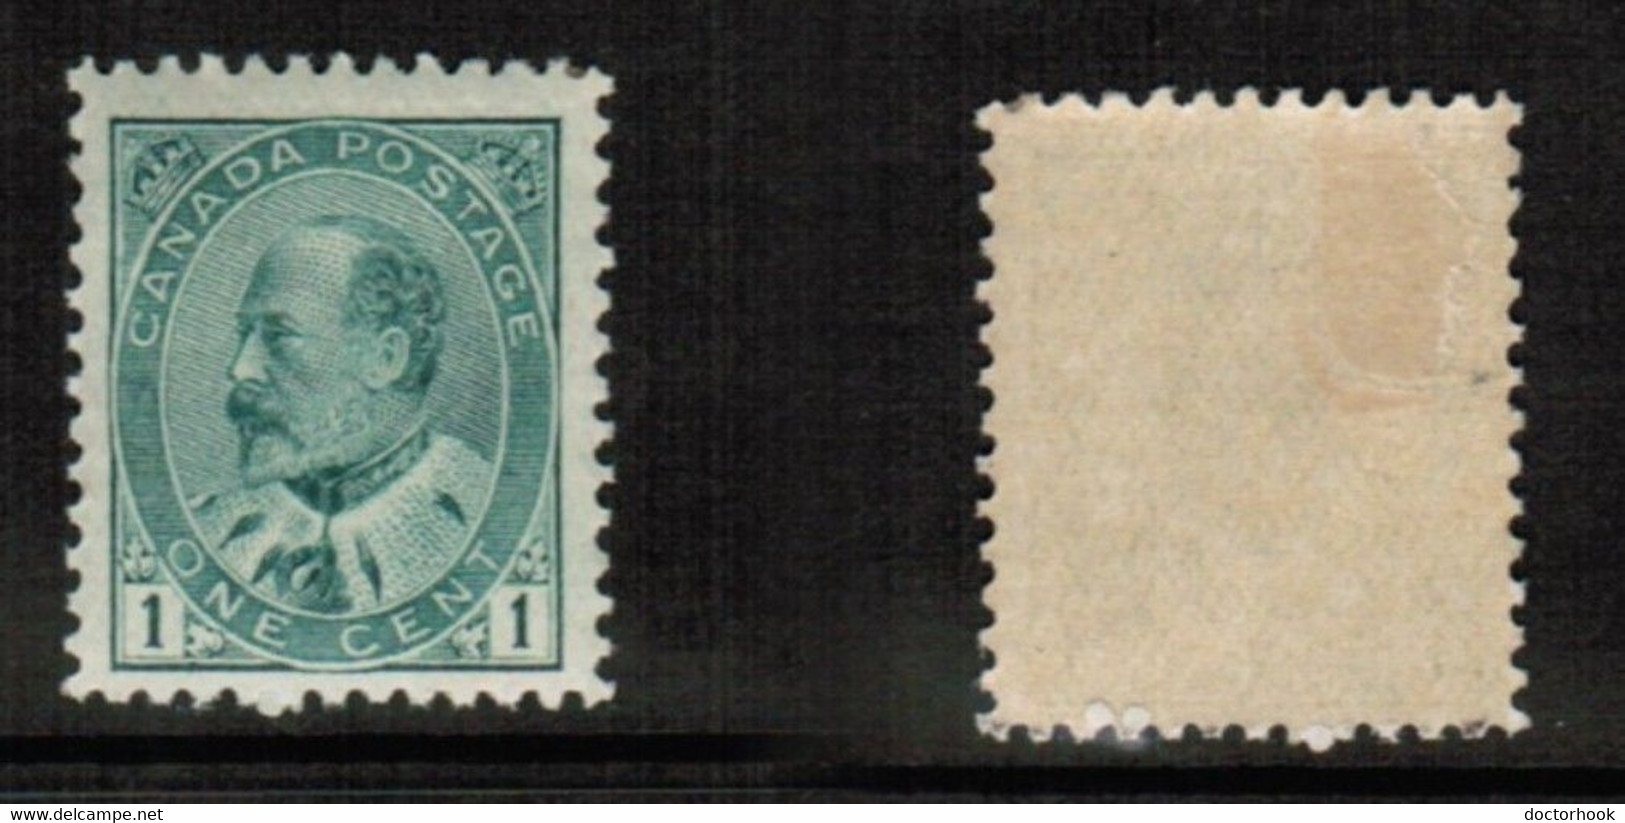 CANADA   Scott # 89* MINT HINGED (CONDITION AS PER SCAN) (CAN-M-1-7) - Unused Stamps